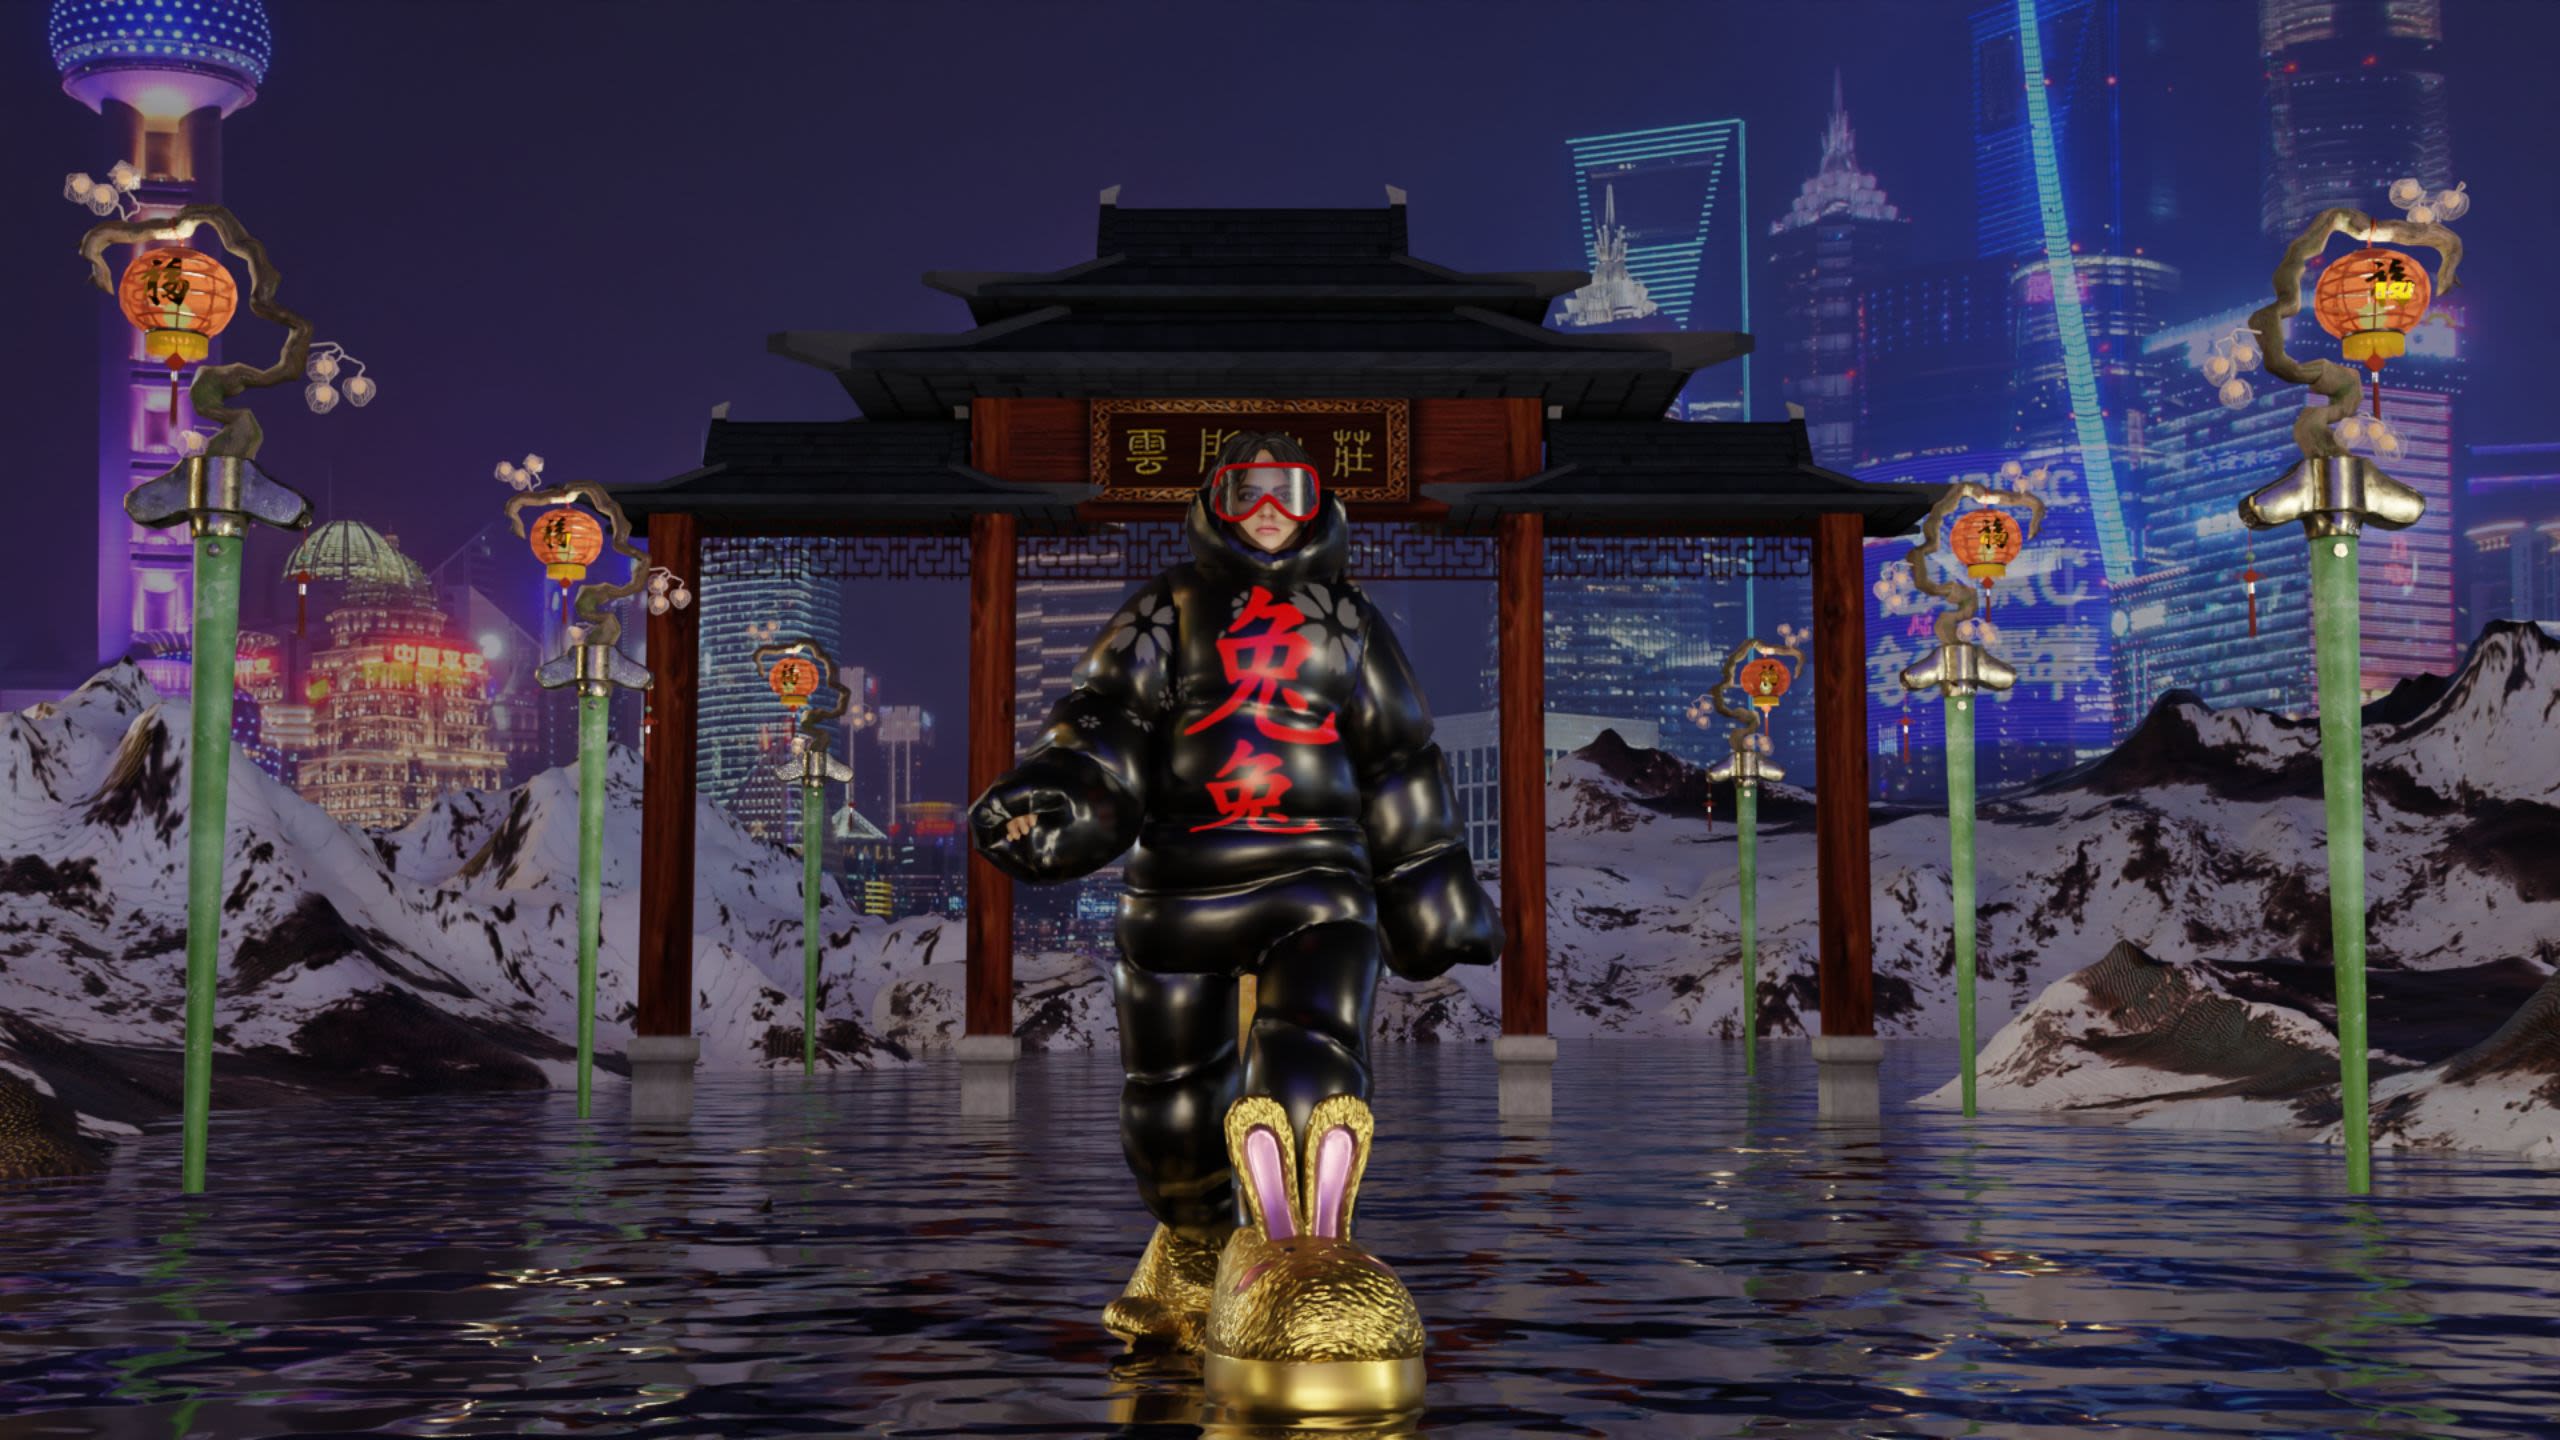 In the center of the image is an avatar of a girl with black hair. She wears big red glasses and a long black coat with red Chinese letters. On her feet, she wears large golden rabbit-shaped slippers. In the background is the entrance to a red Chinese temple decorated with red lanterns.